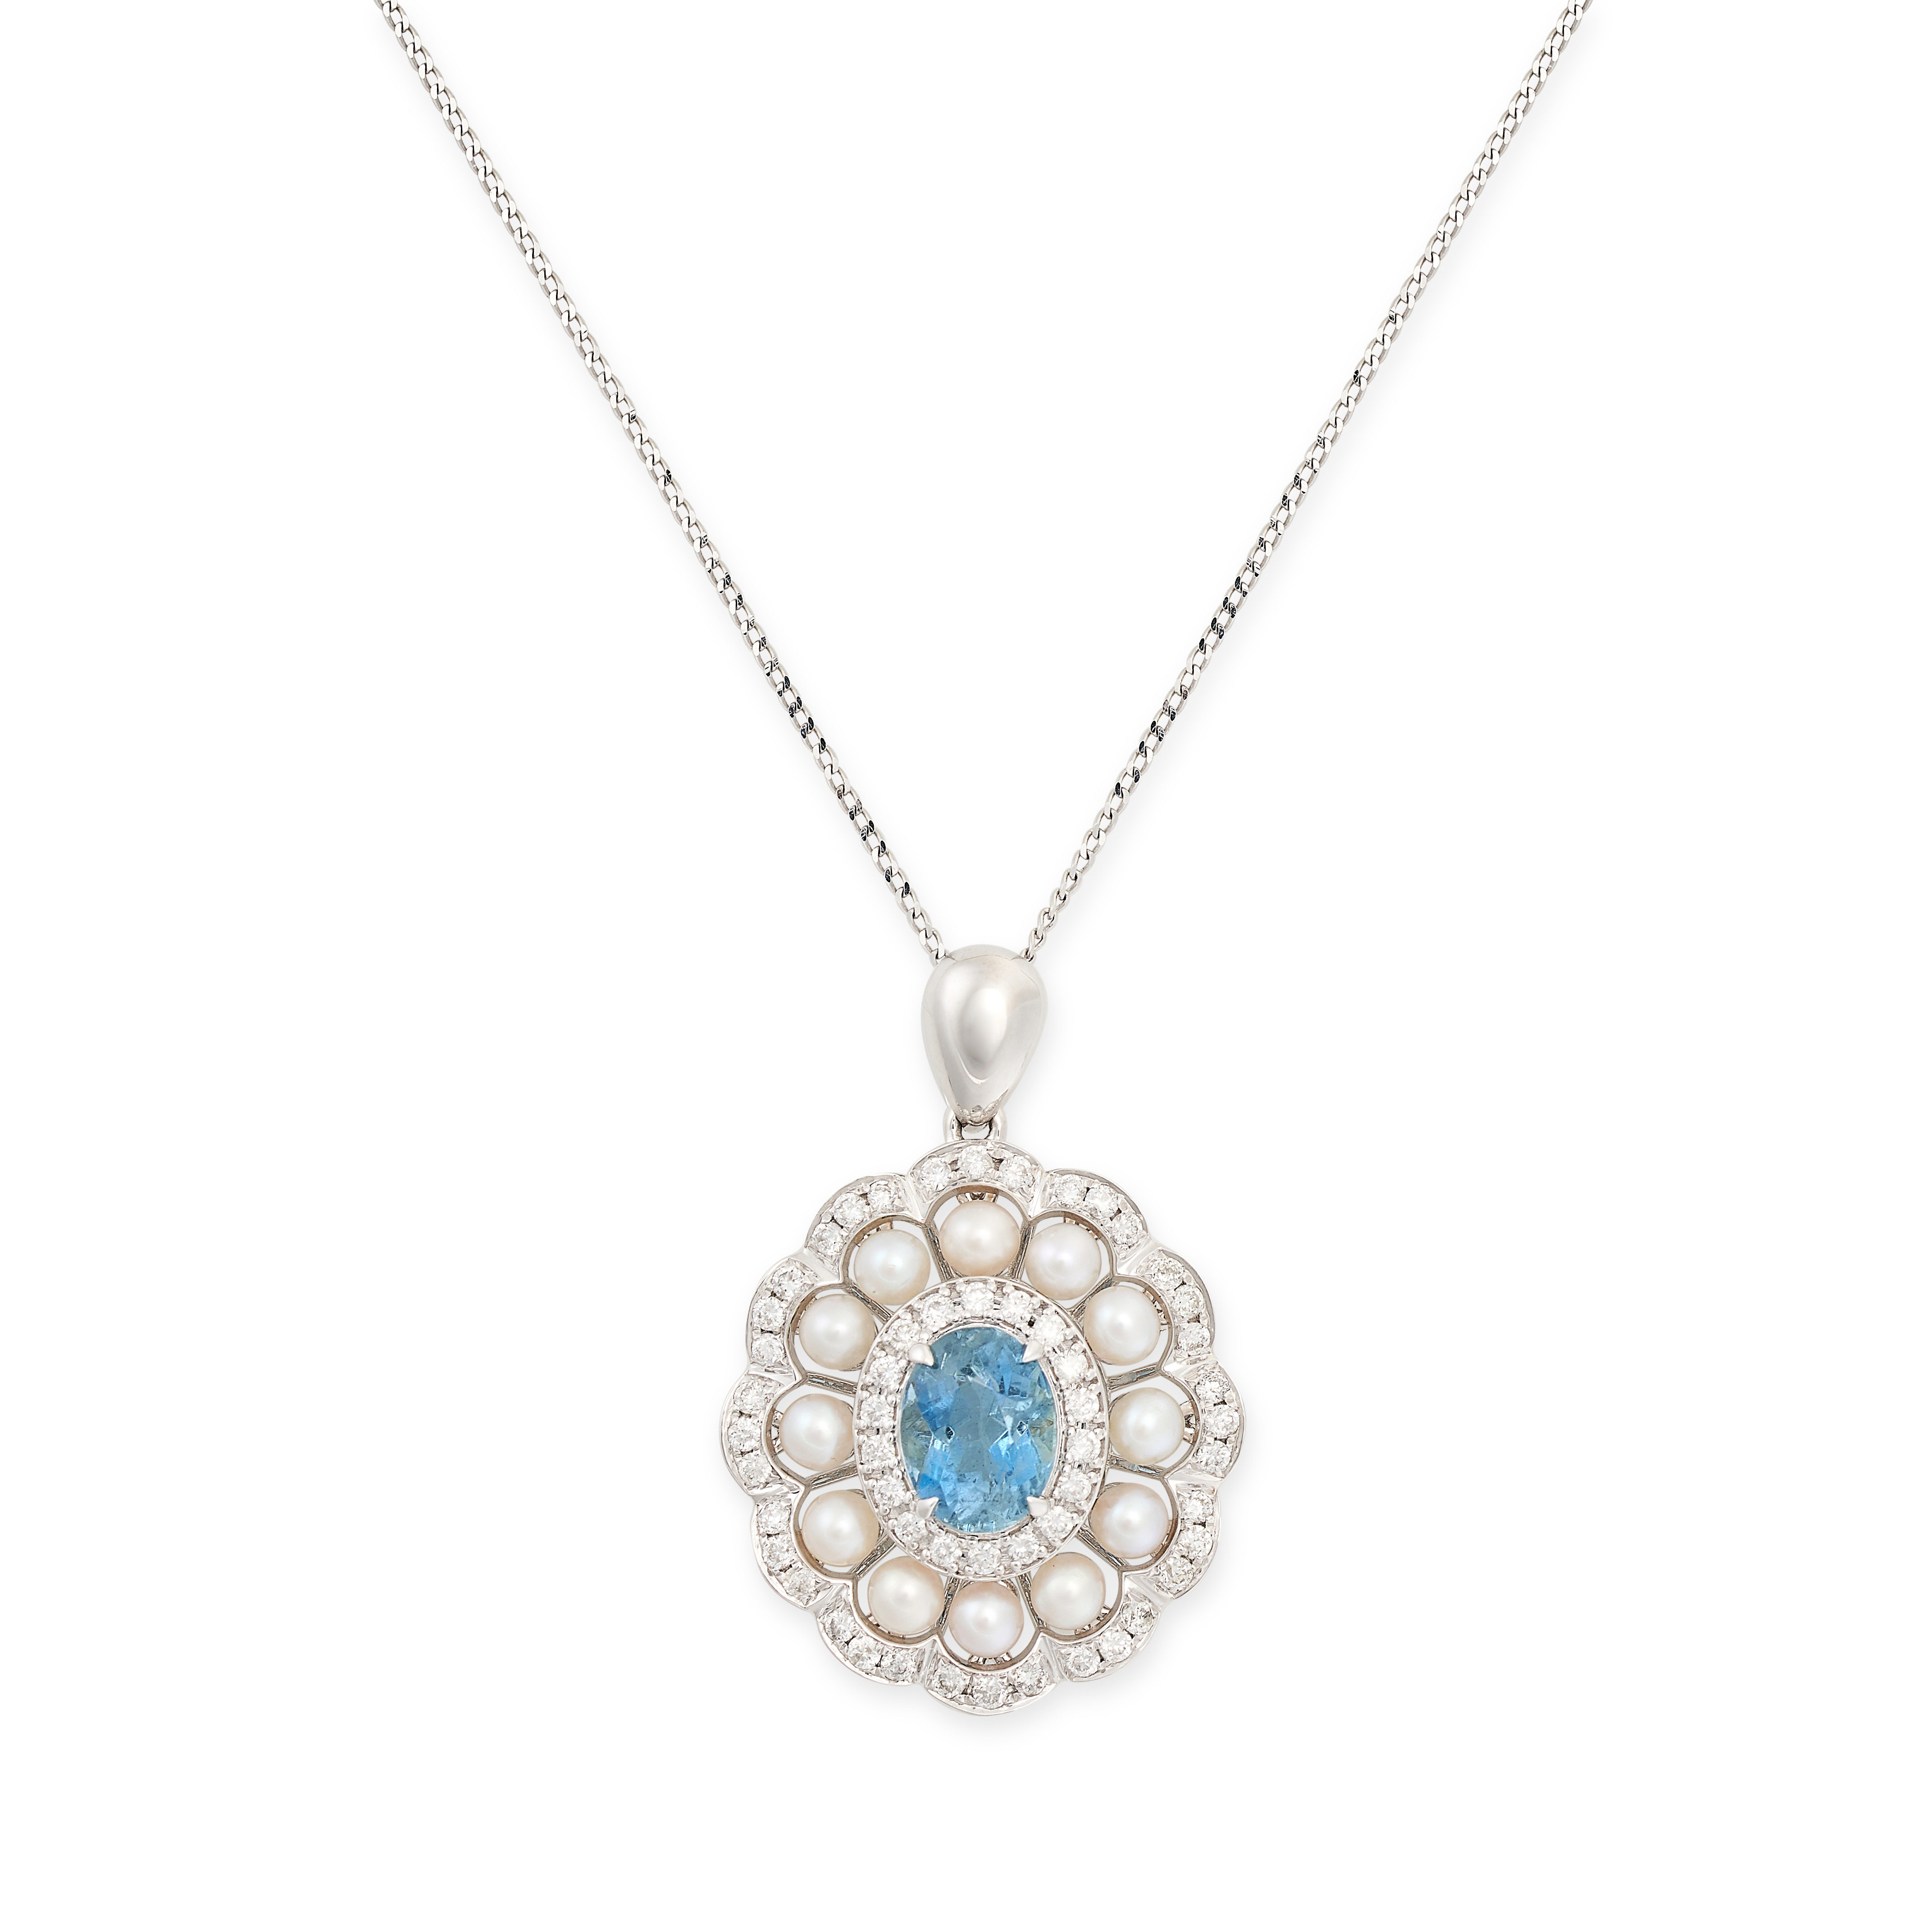 AN AQUAMARINE, DIAMOND AND PEARL PENDANT in 18ct white gold, set centrally with an oval cut